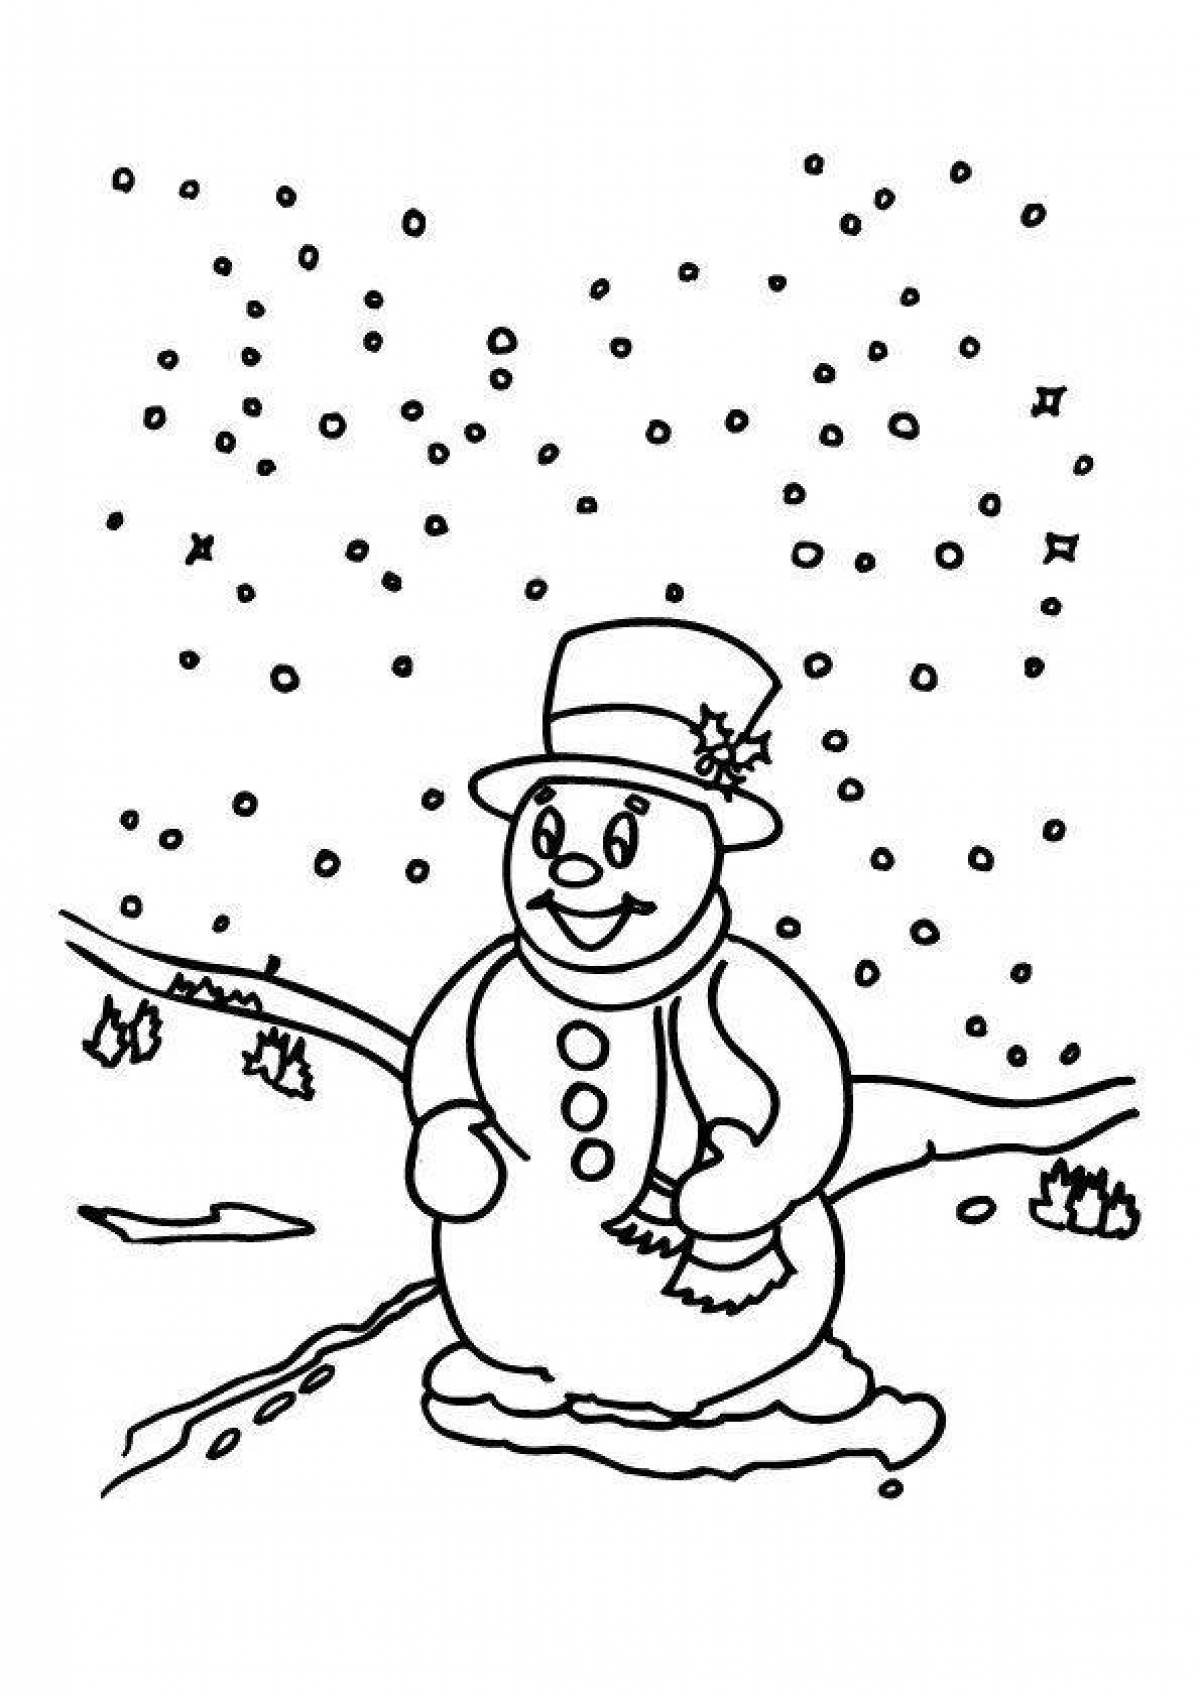 Gorgeous snowfall coloring page